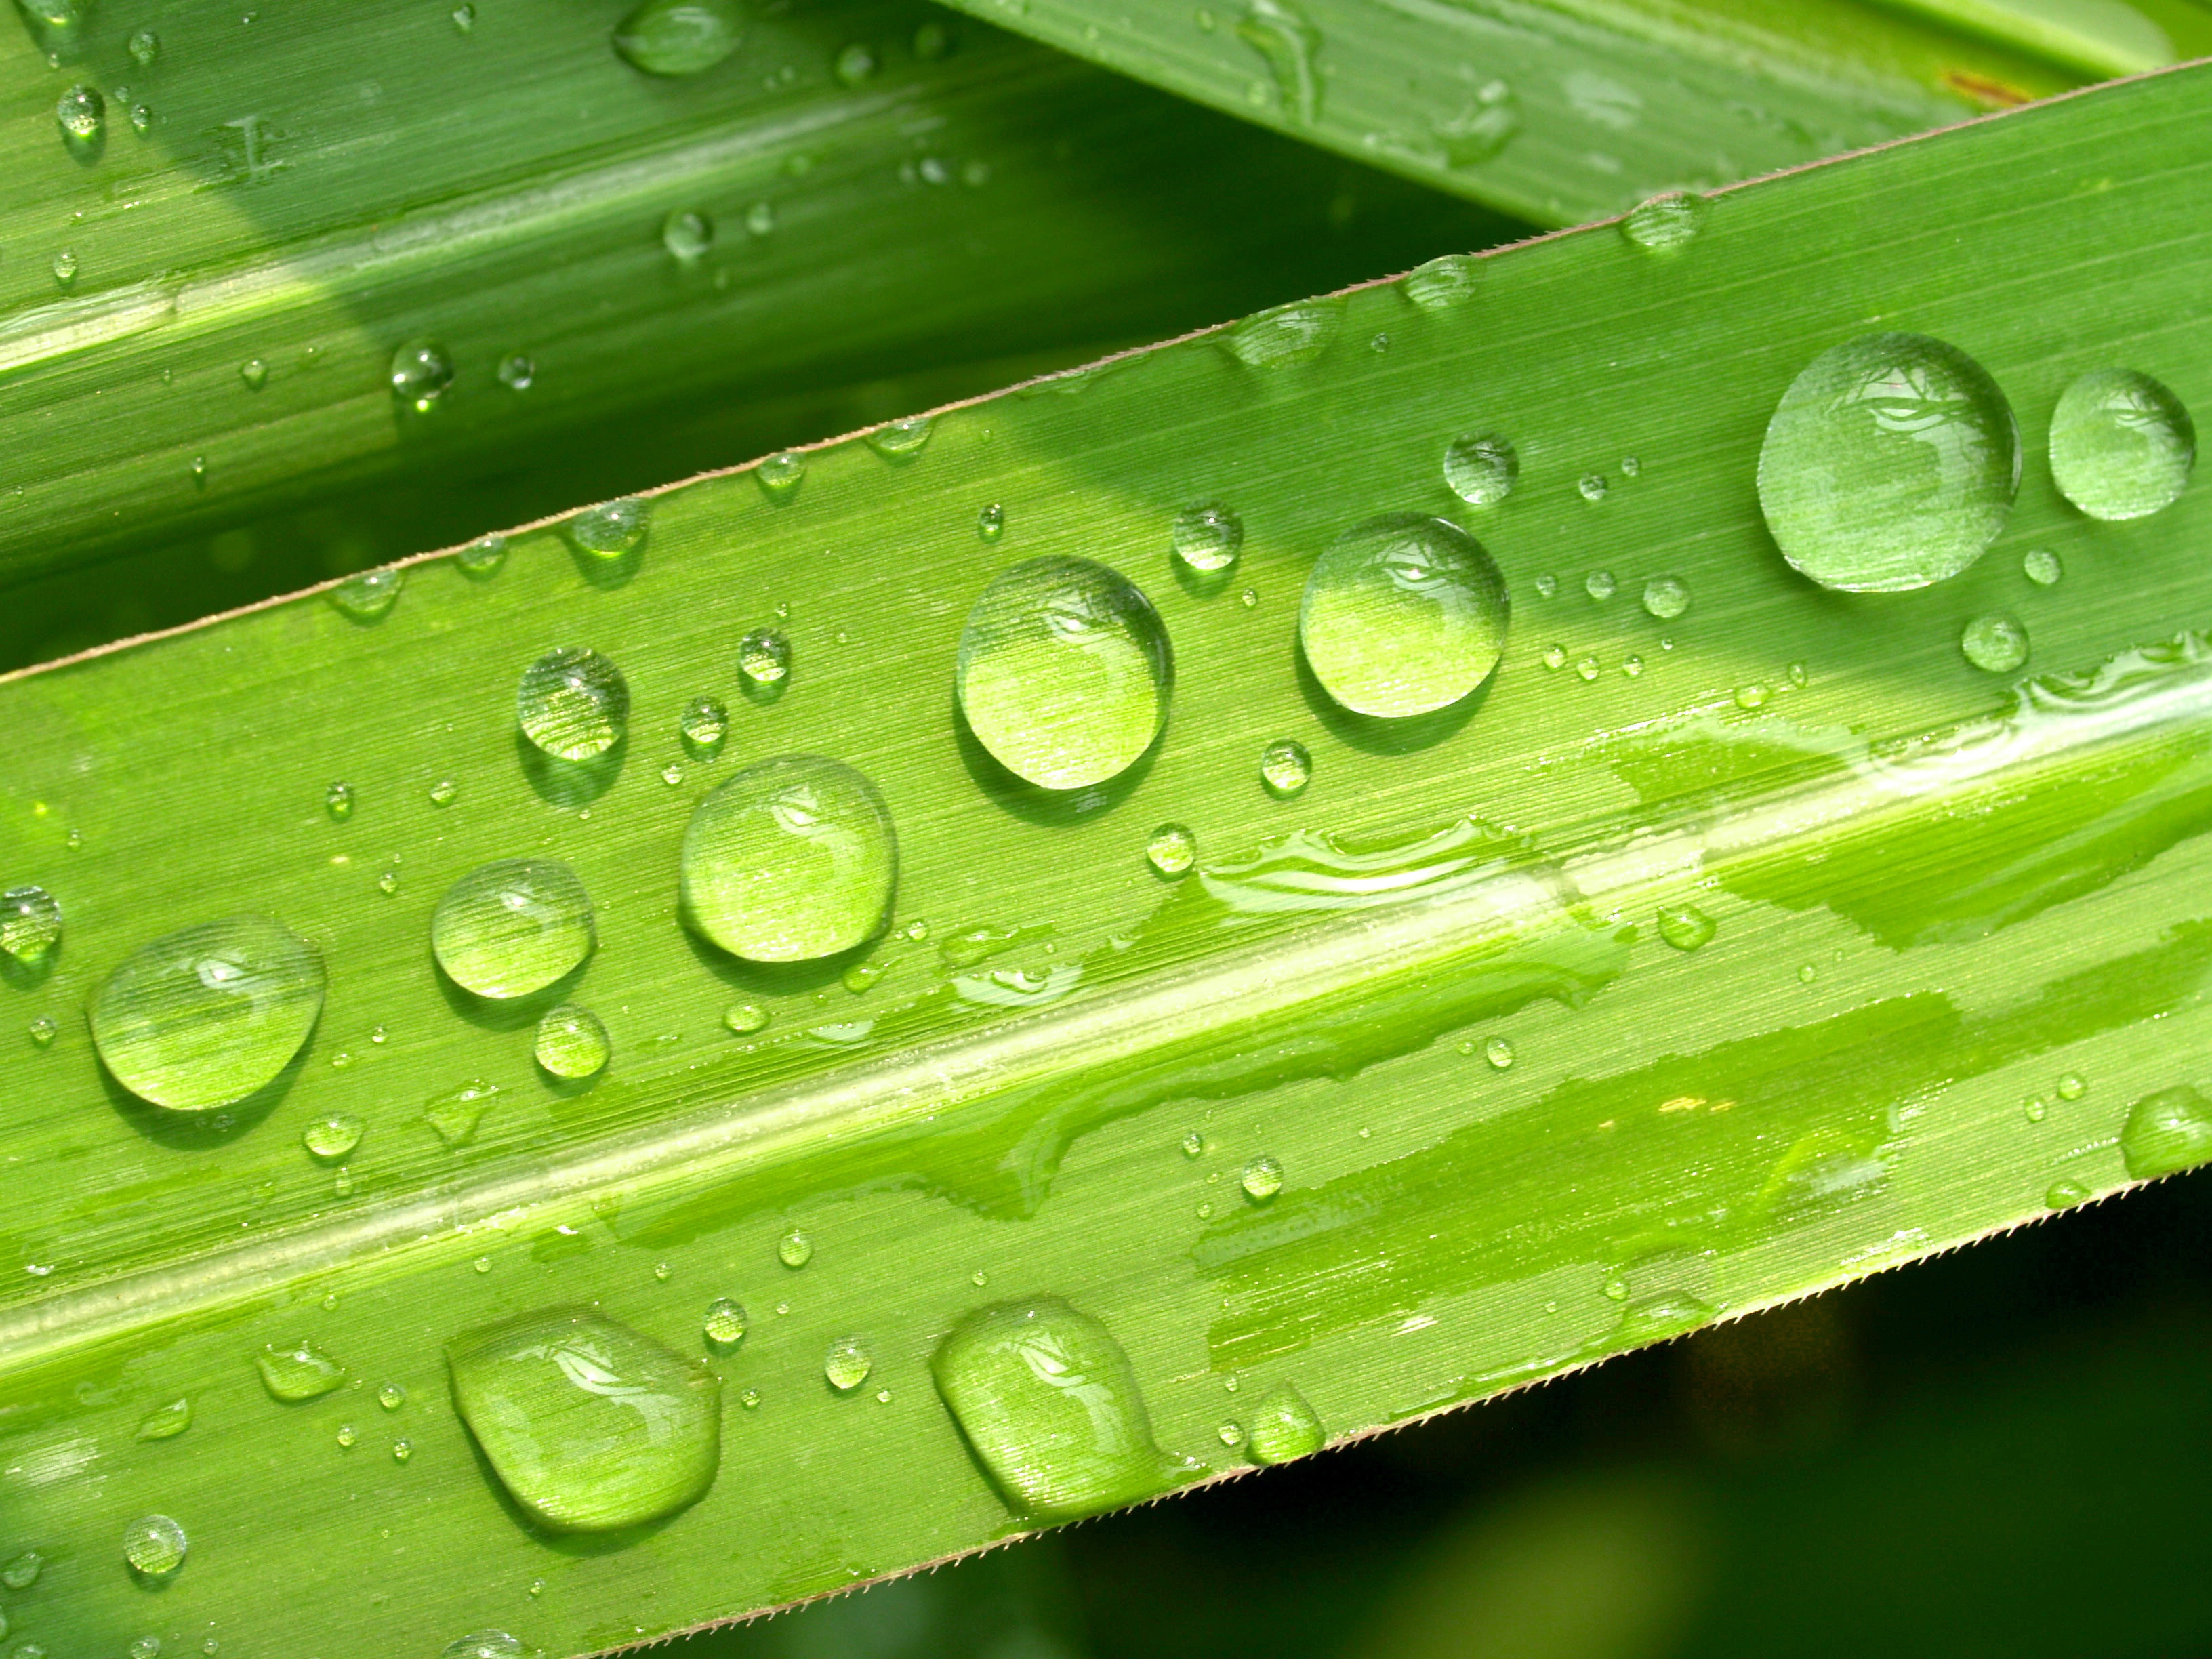 water drop of green leaf close up photography, drops, grass, dew